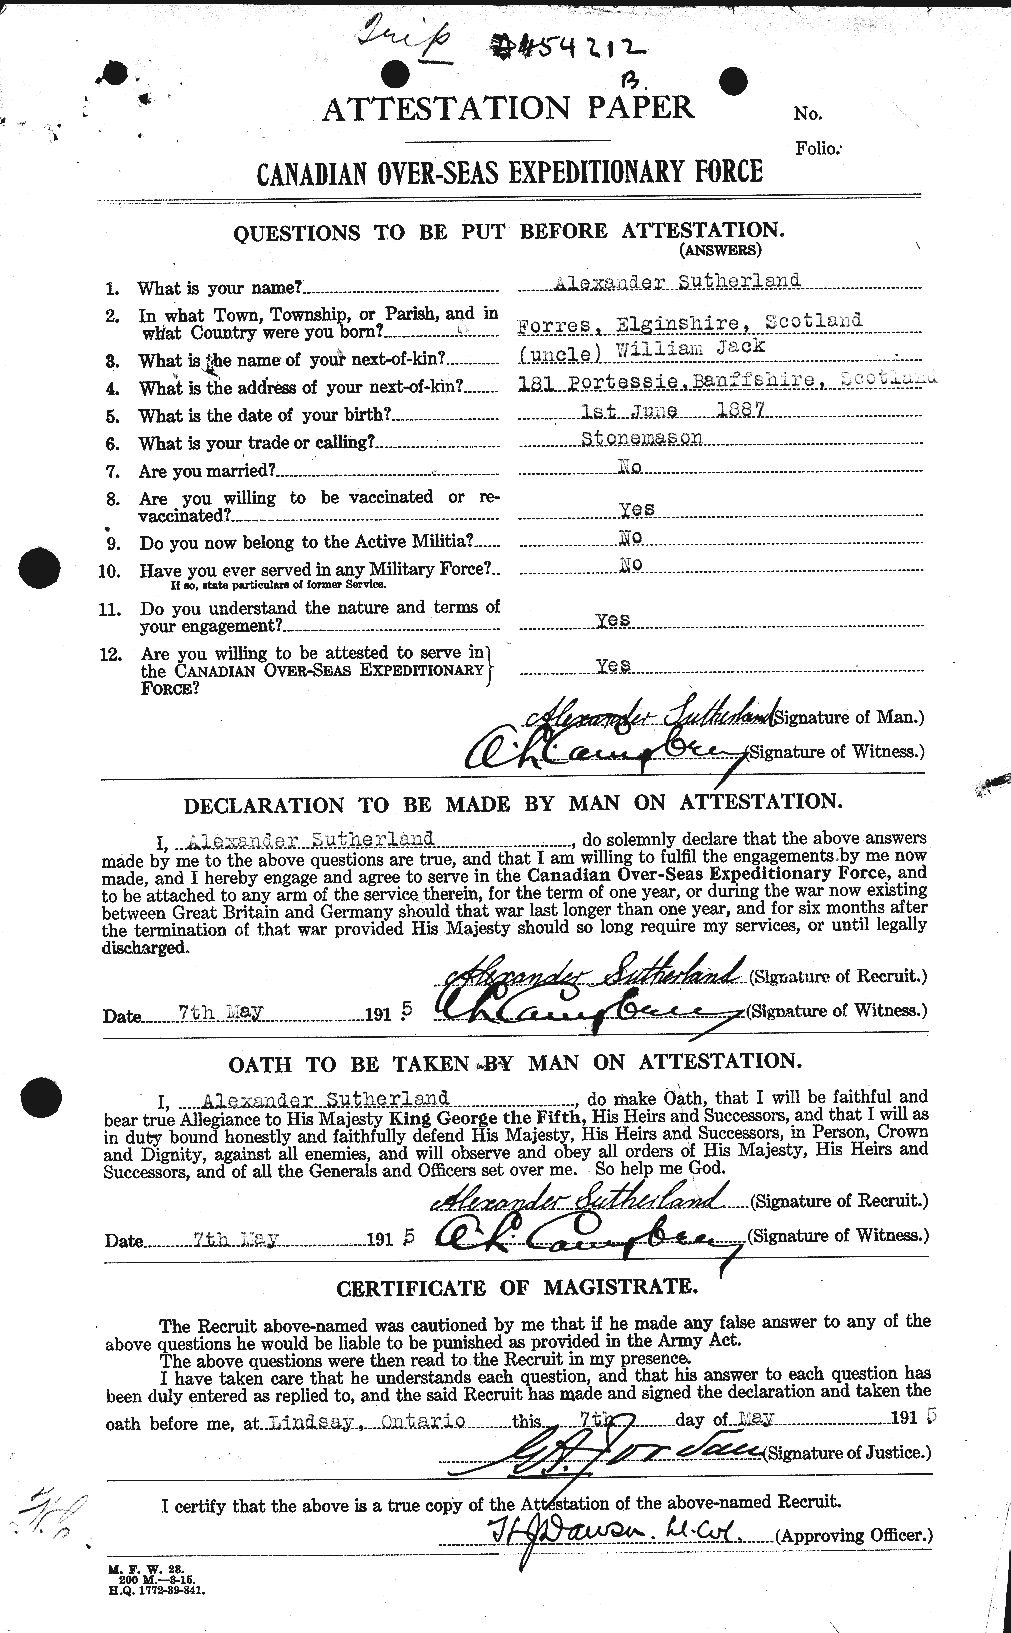 Personnel Records of the First World War - CEF 125356a